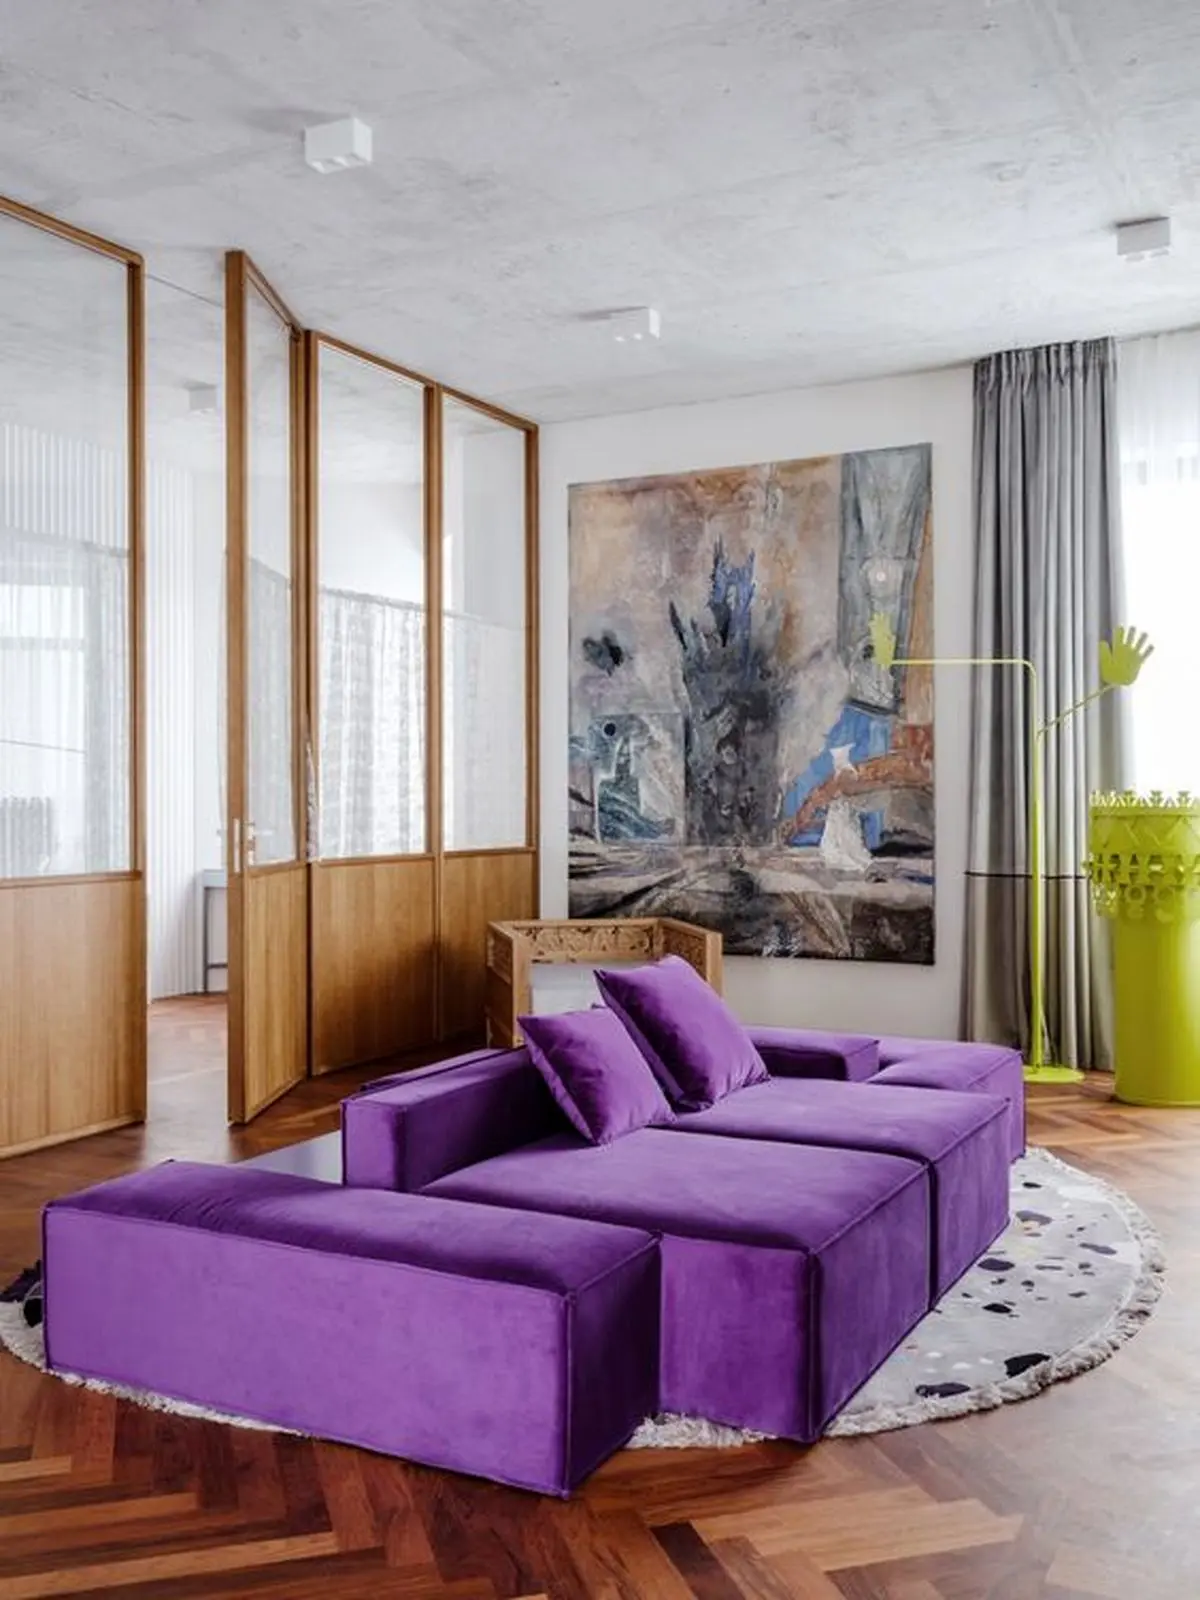 20-a-contemporary-living-room-with-a-neutral-base-a-bold-purple-sofa-a-statement-artwork-grey-curtains-and-a-neon-yellow-table